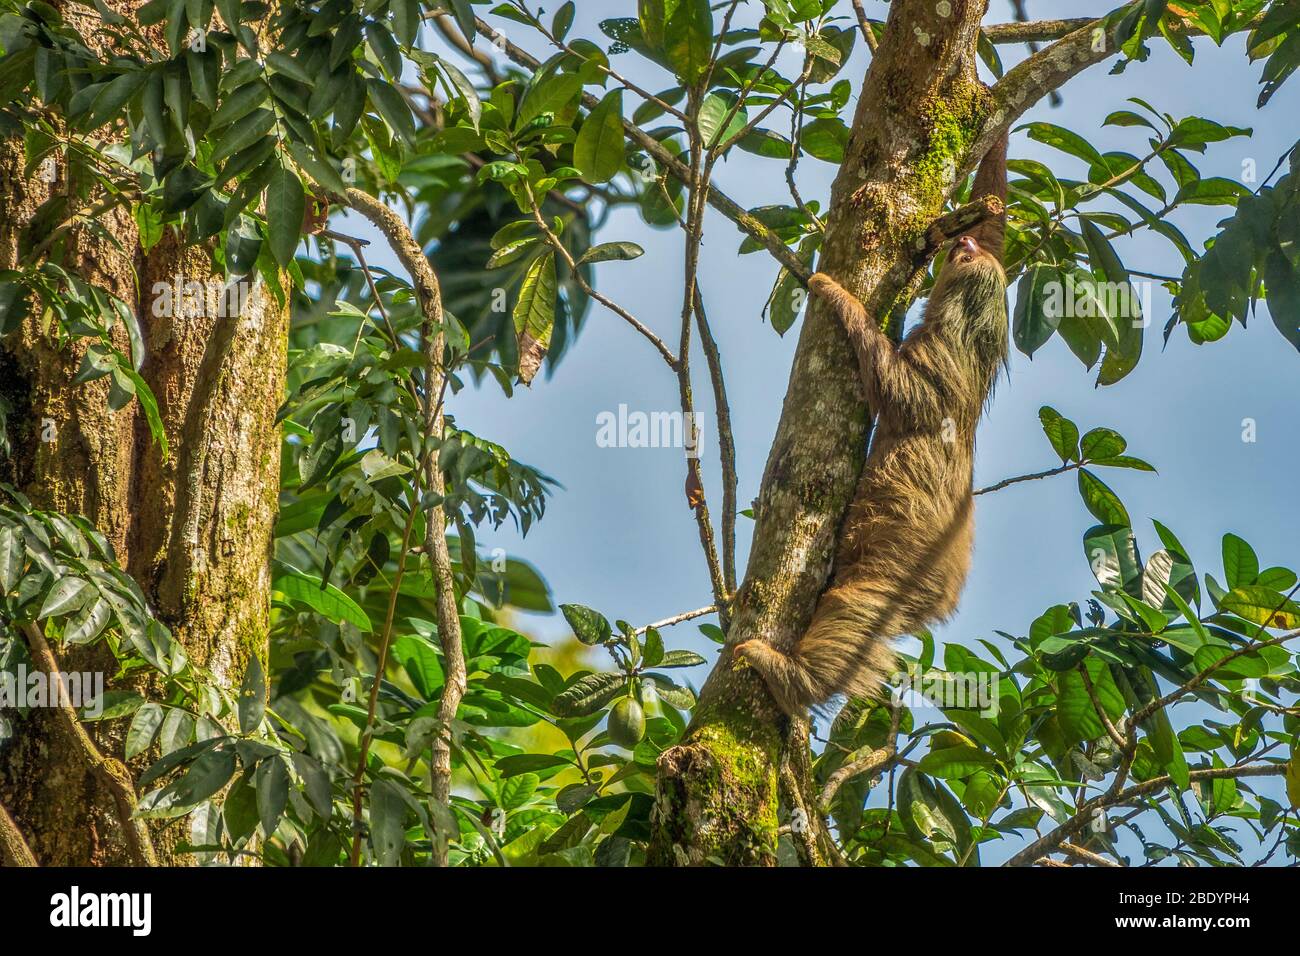 Two Toed Sloth (Choloepus didactylus), Climbing In Tortuguero canals Area, Costa Rica, Central America Stock Photo